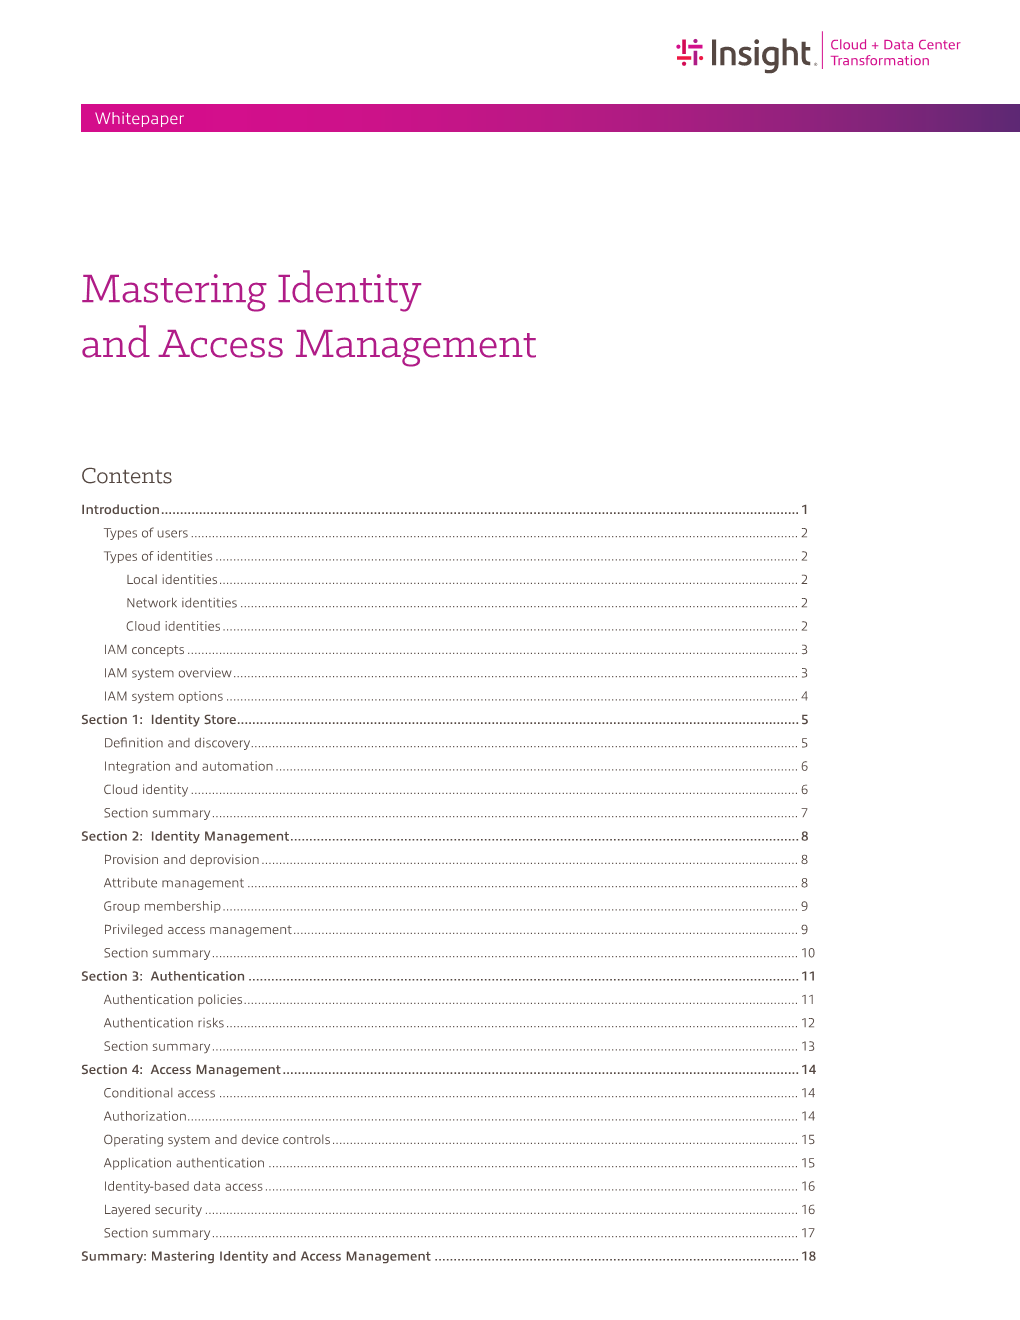 Mastering Identity and Access Management